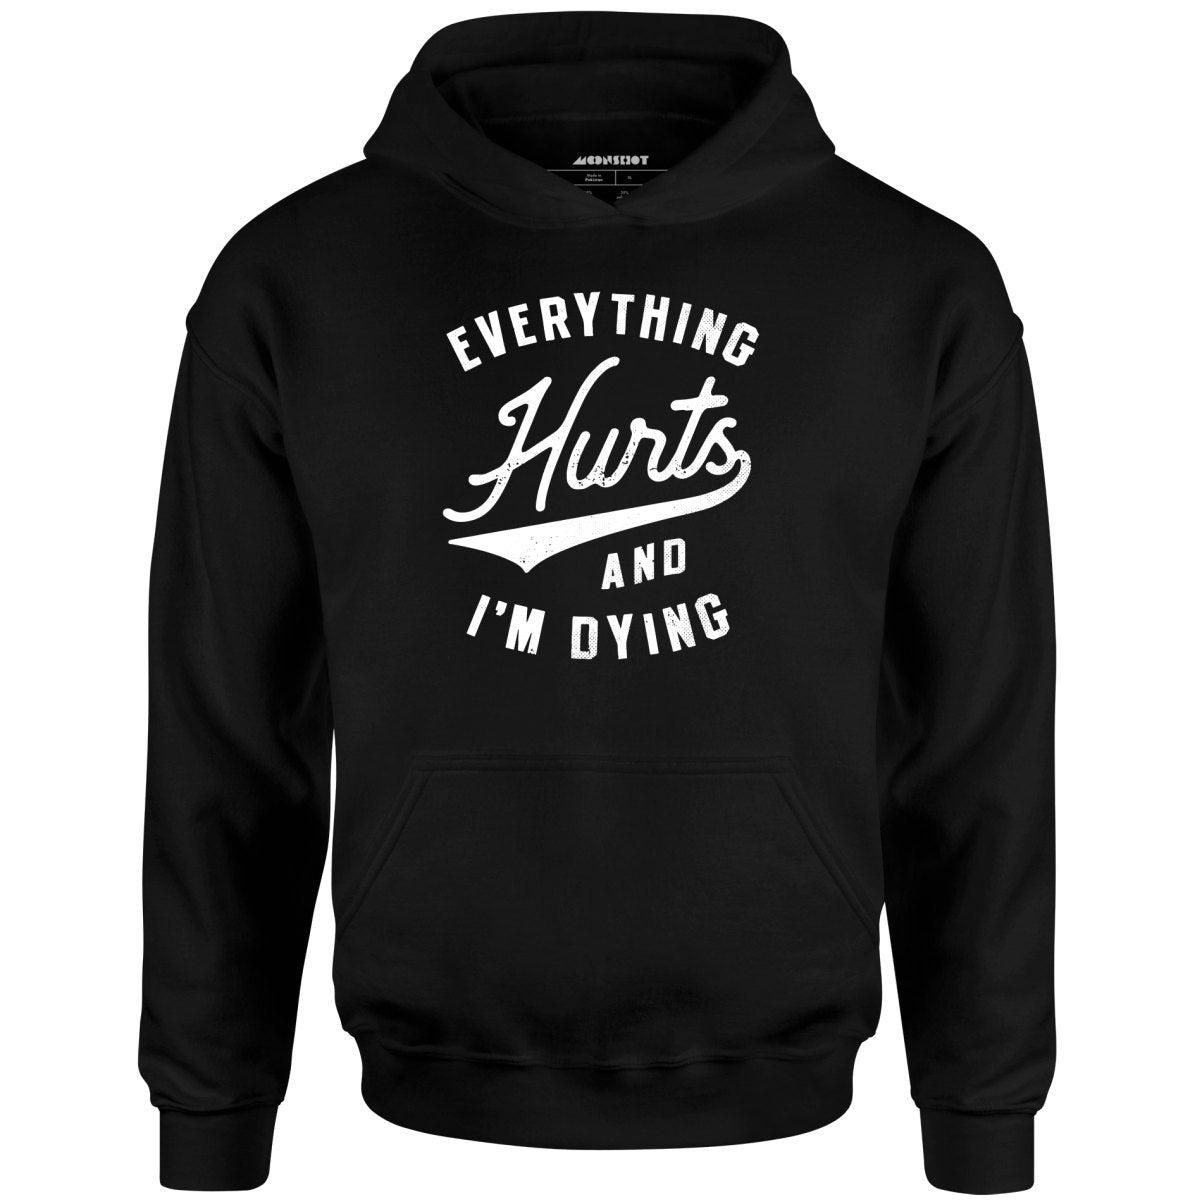 Everything Hurts and I'm Dying - Unisex Hoodie